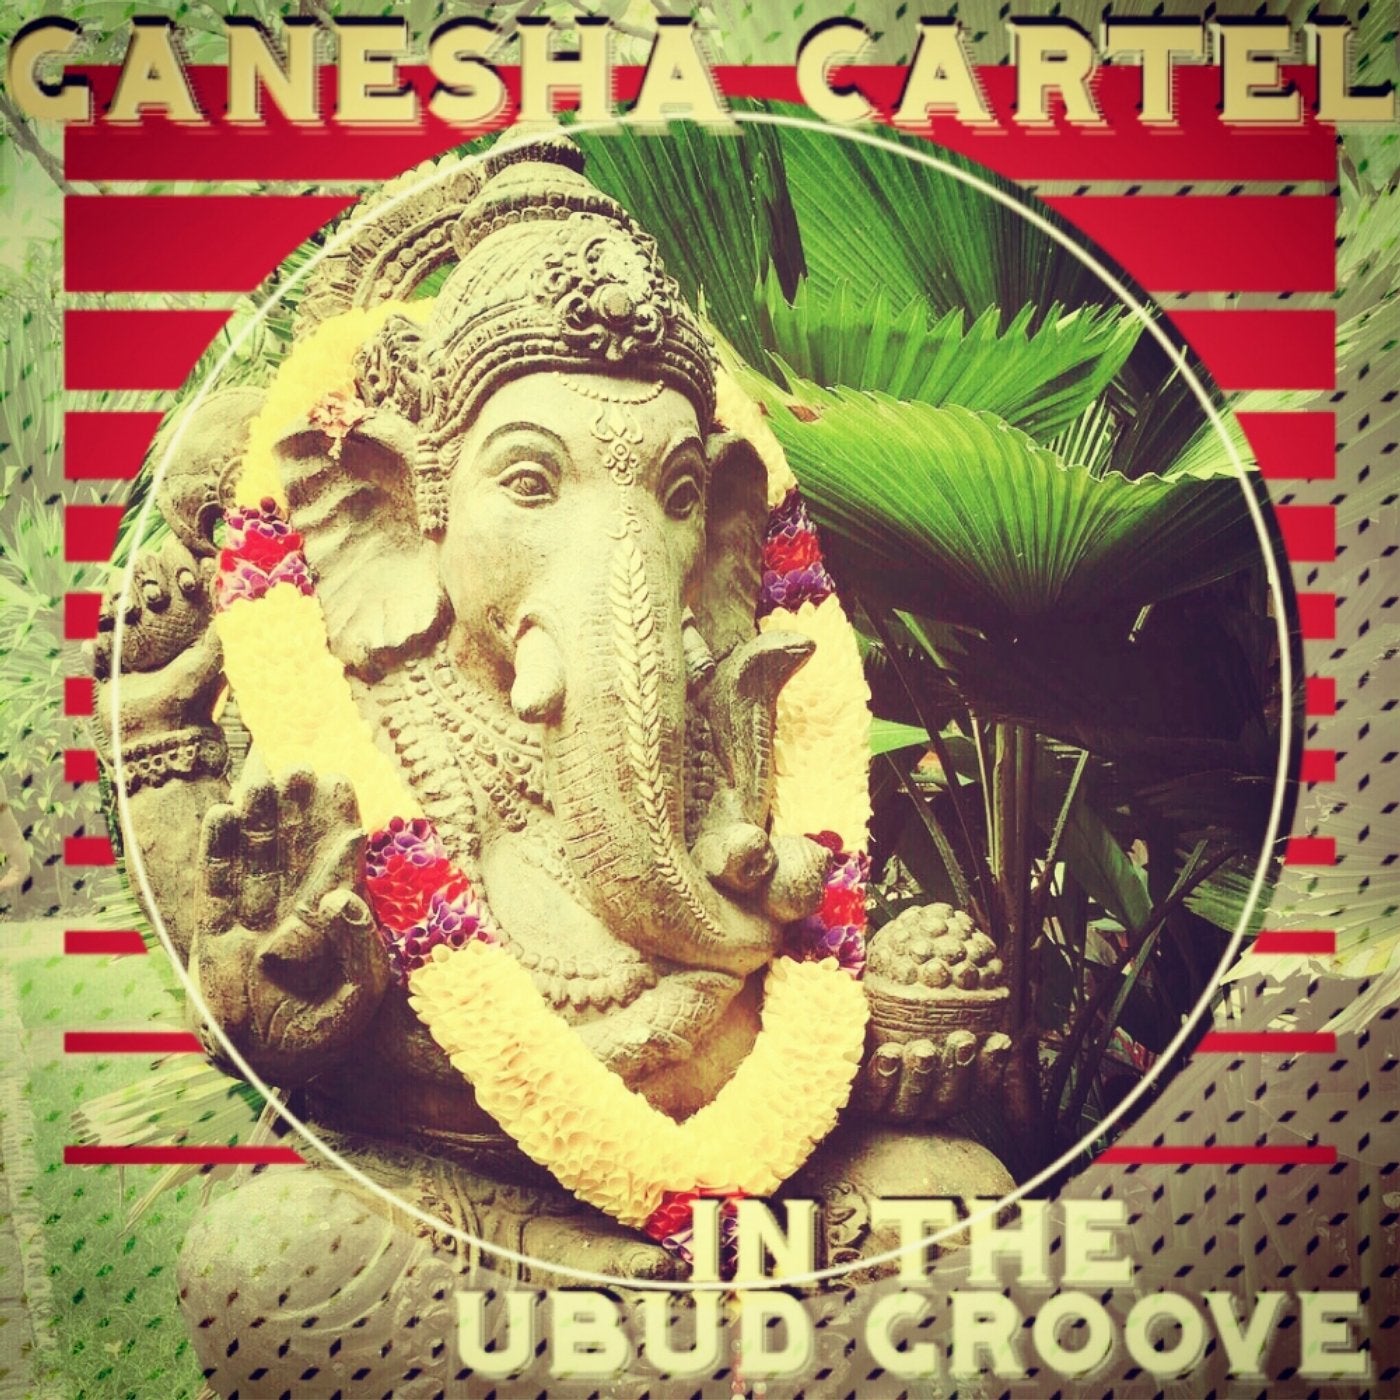 In The Ubud Groove (Mixed by Ganesha Cartel)